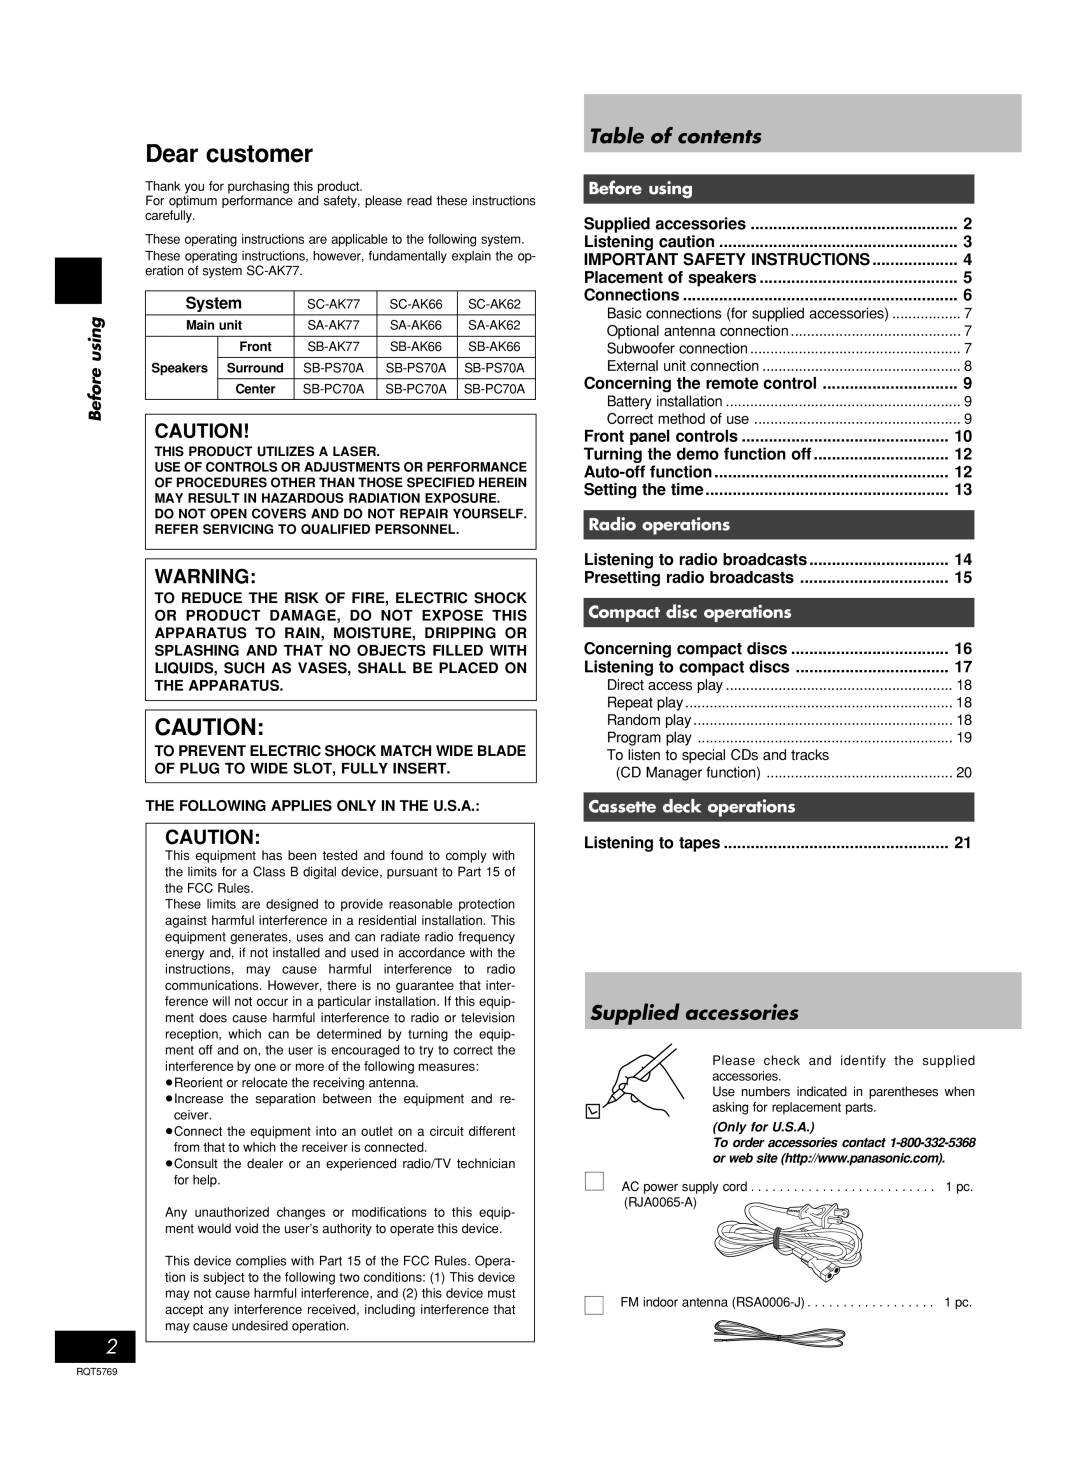 Panasonic SC-AK62 manual Table of contents, Supplied accessories, Before using, Radio operations, Compact disc operations 